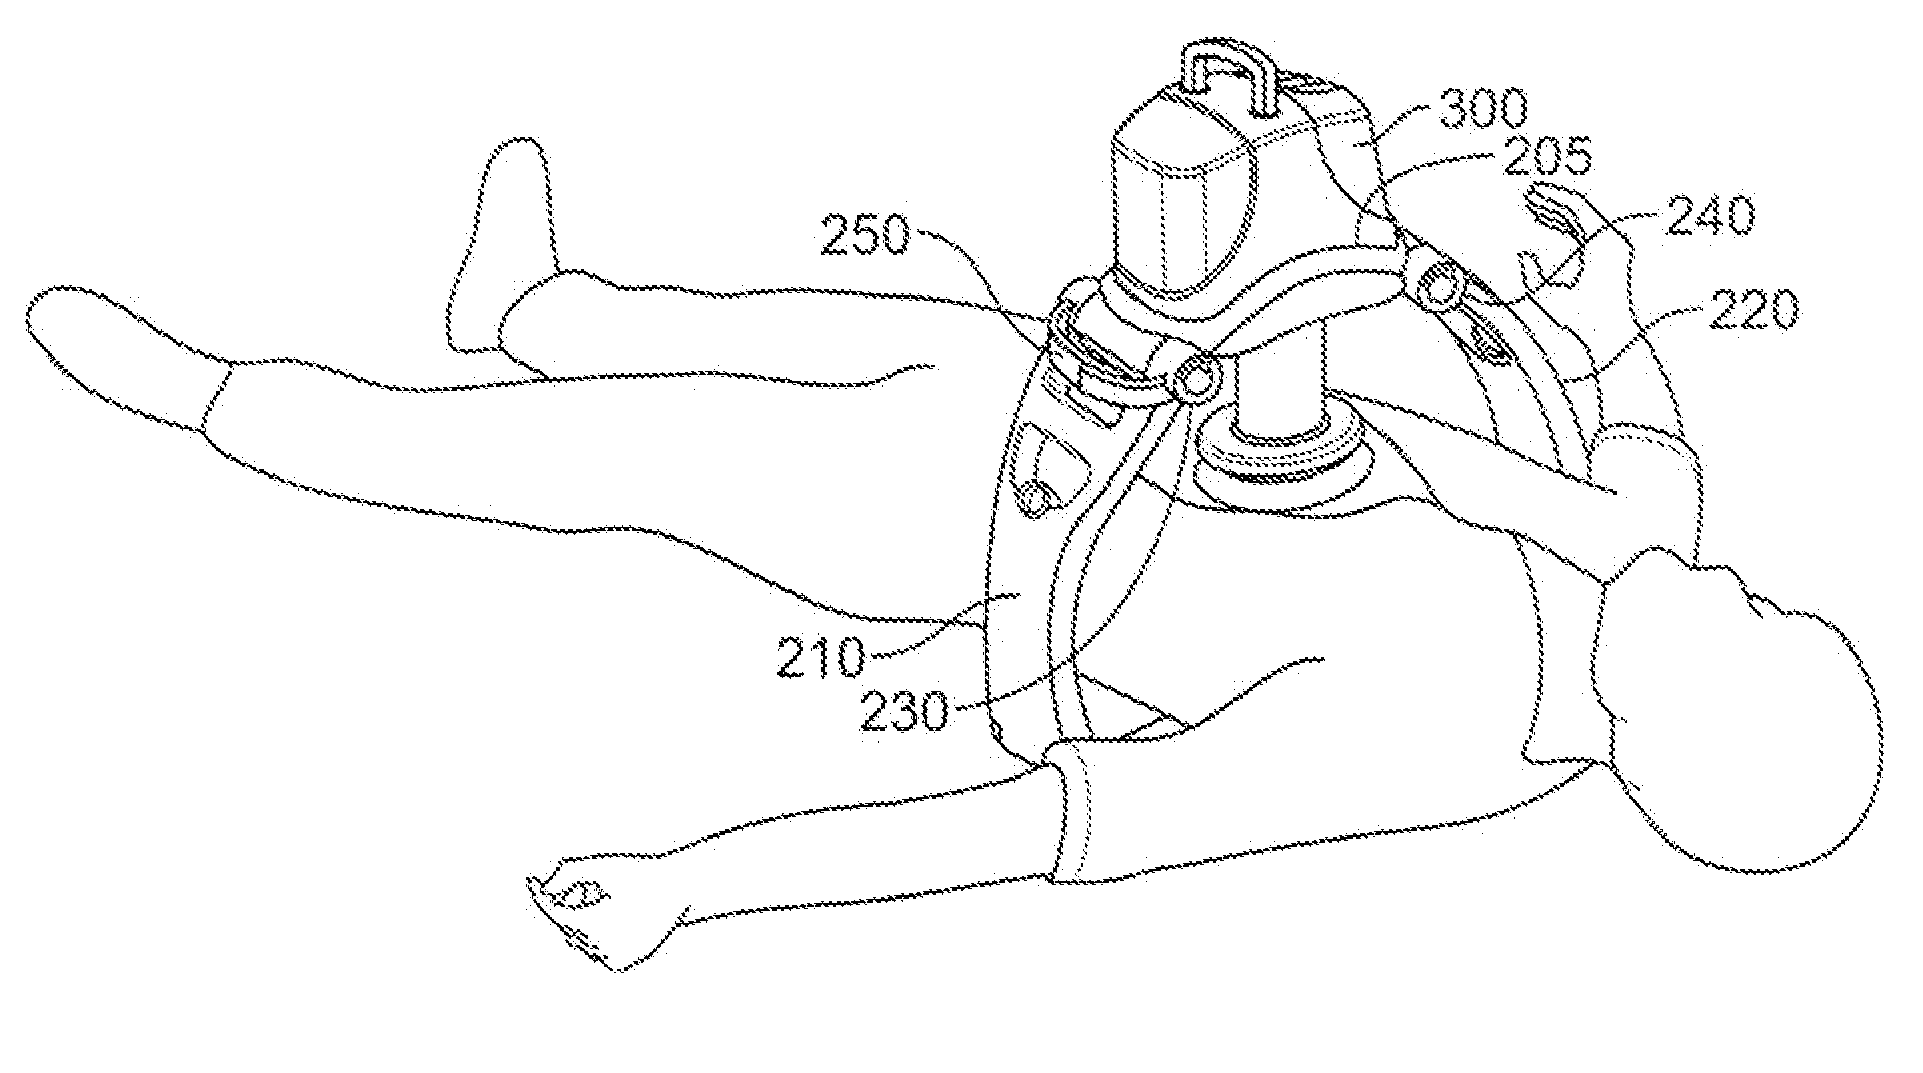 Rigid support structure on two legs for CPR